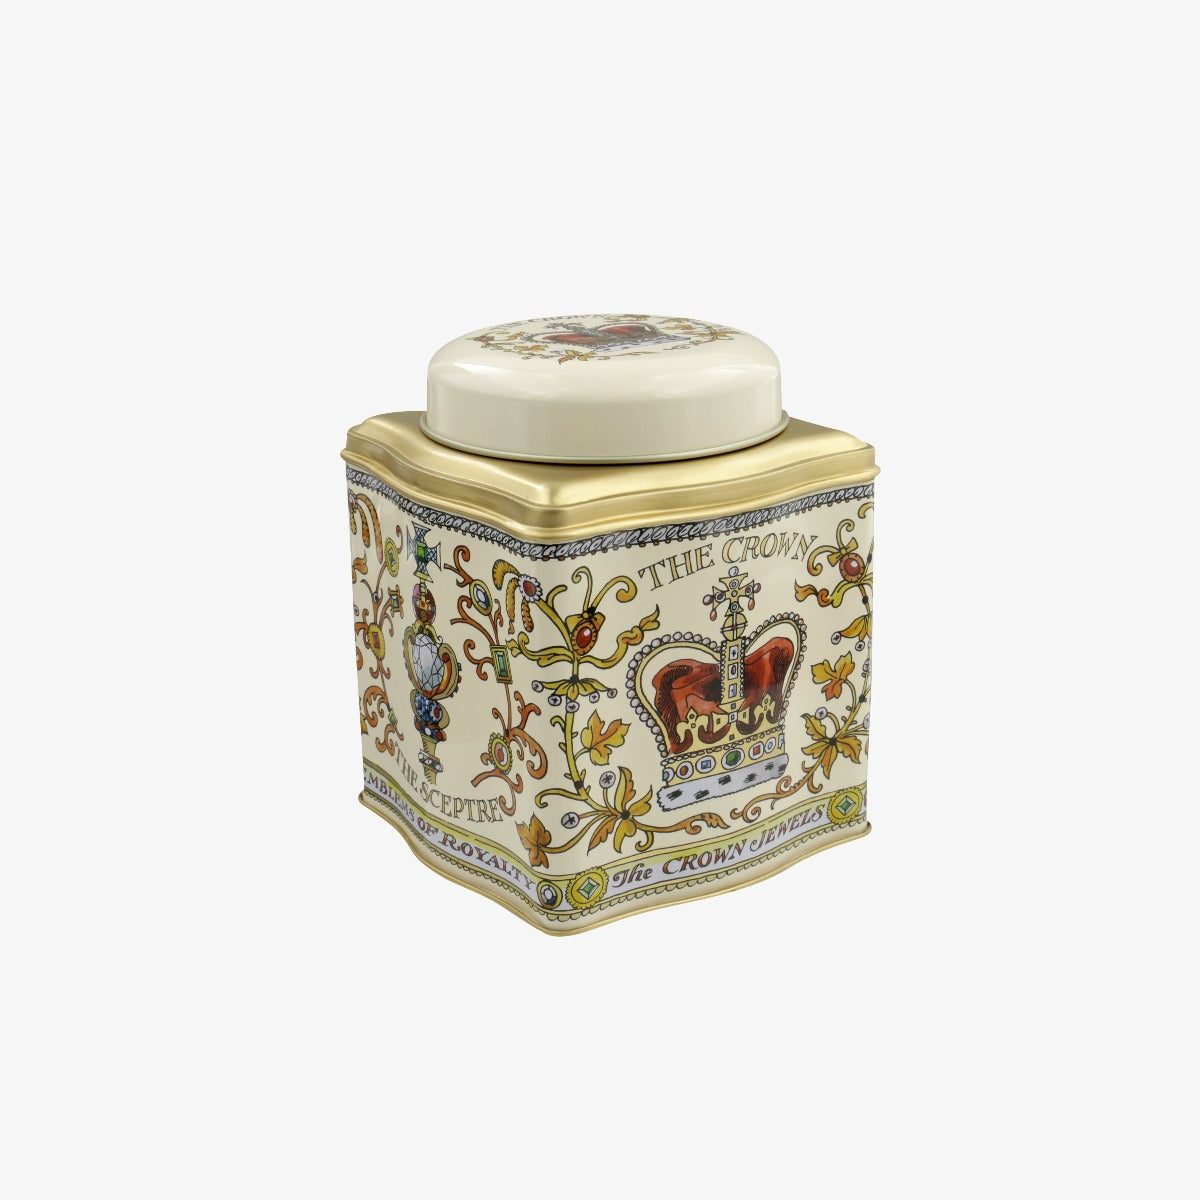 Emma Bridgewater The Crown Jewels Dome Lid Curved Tin Caddy